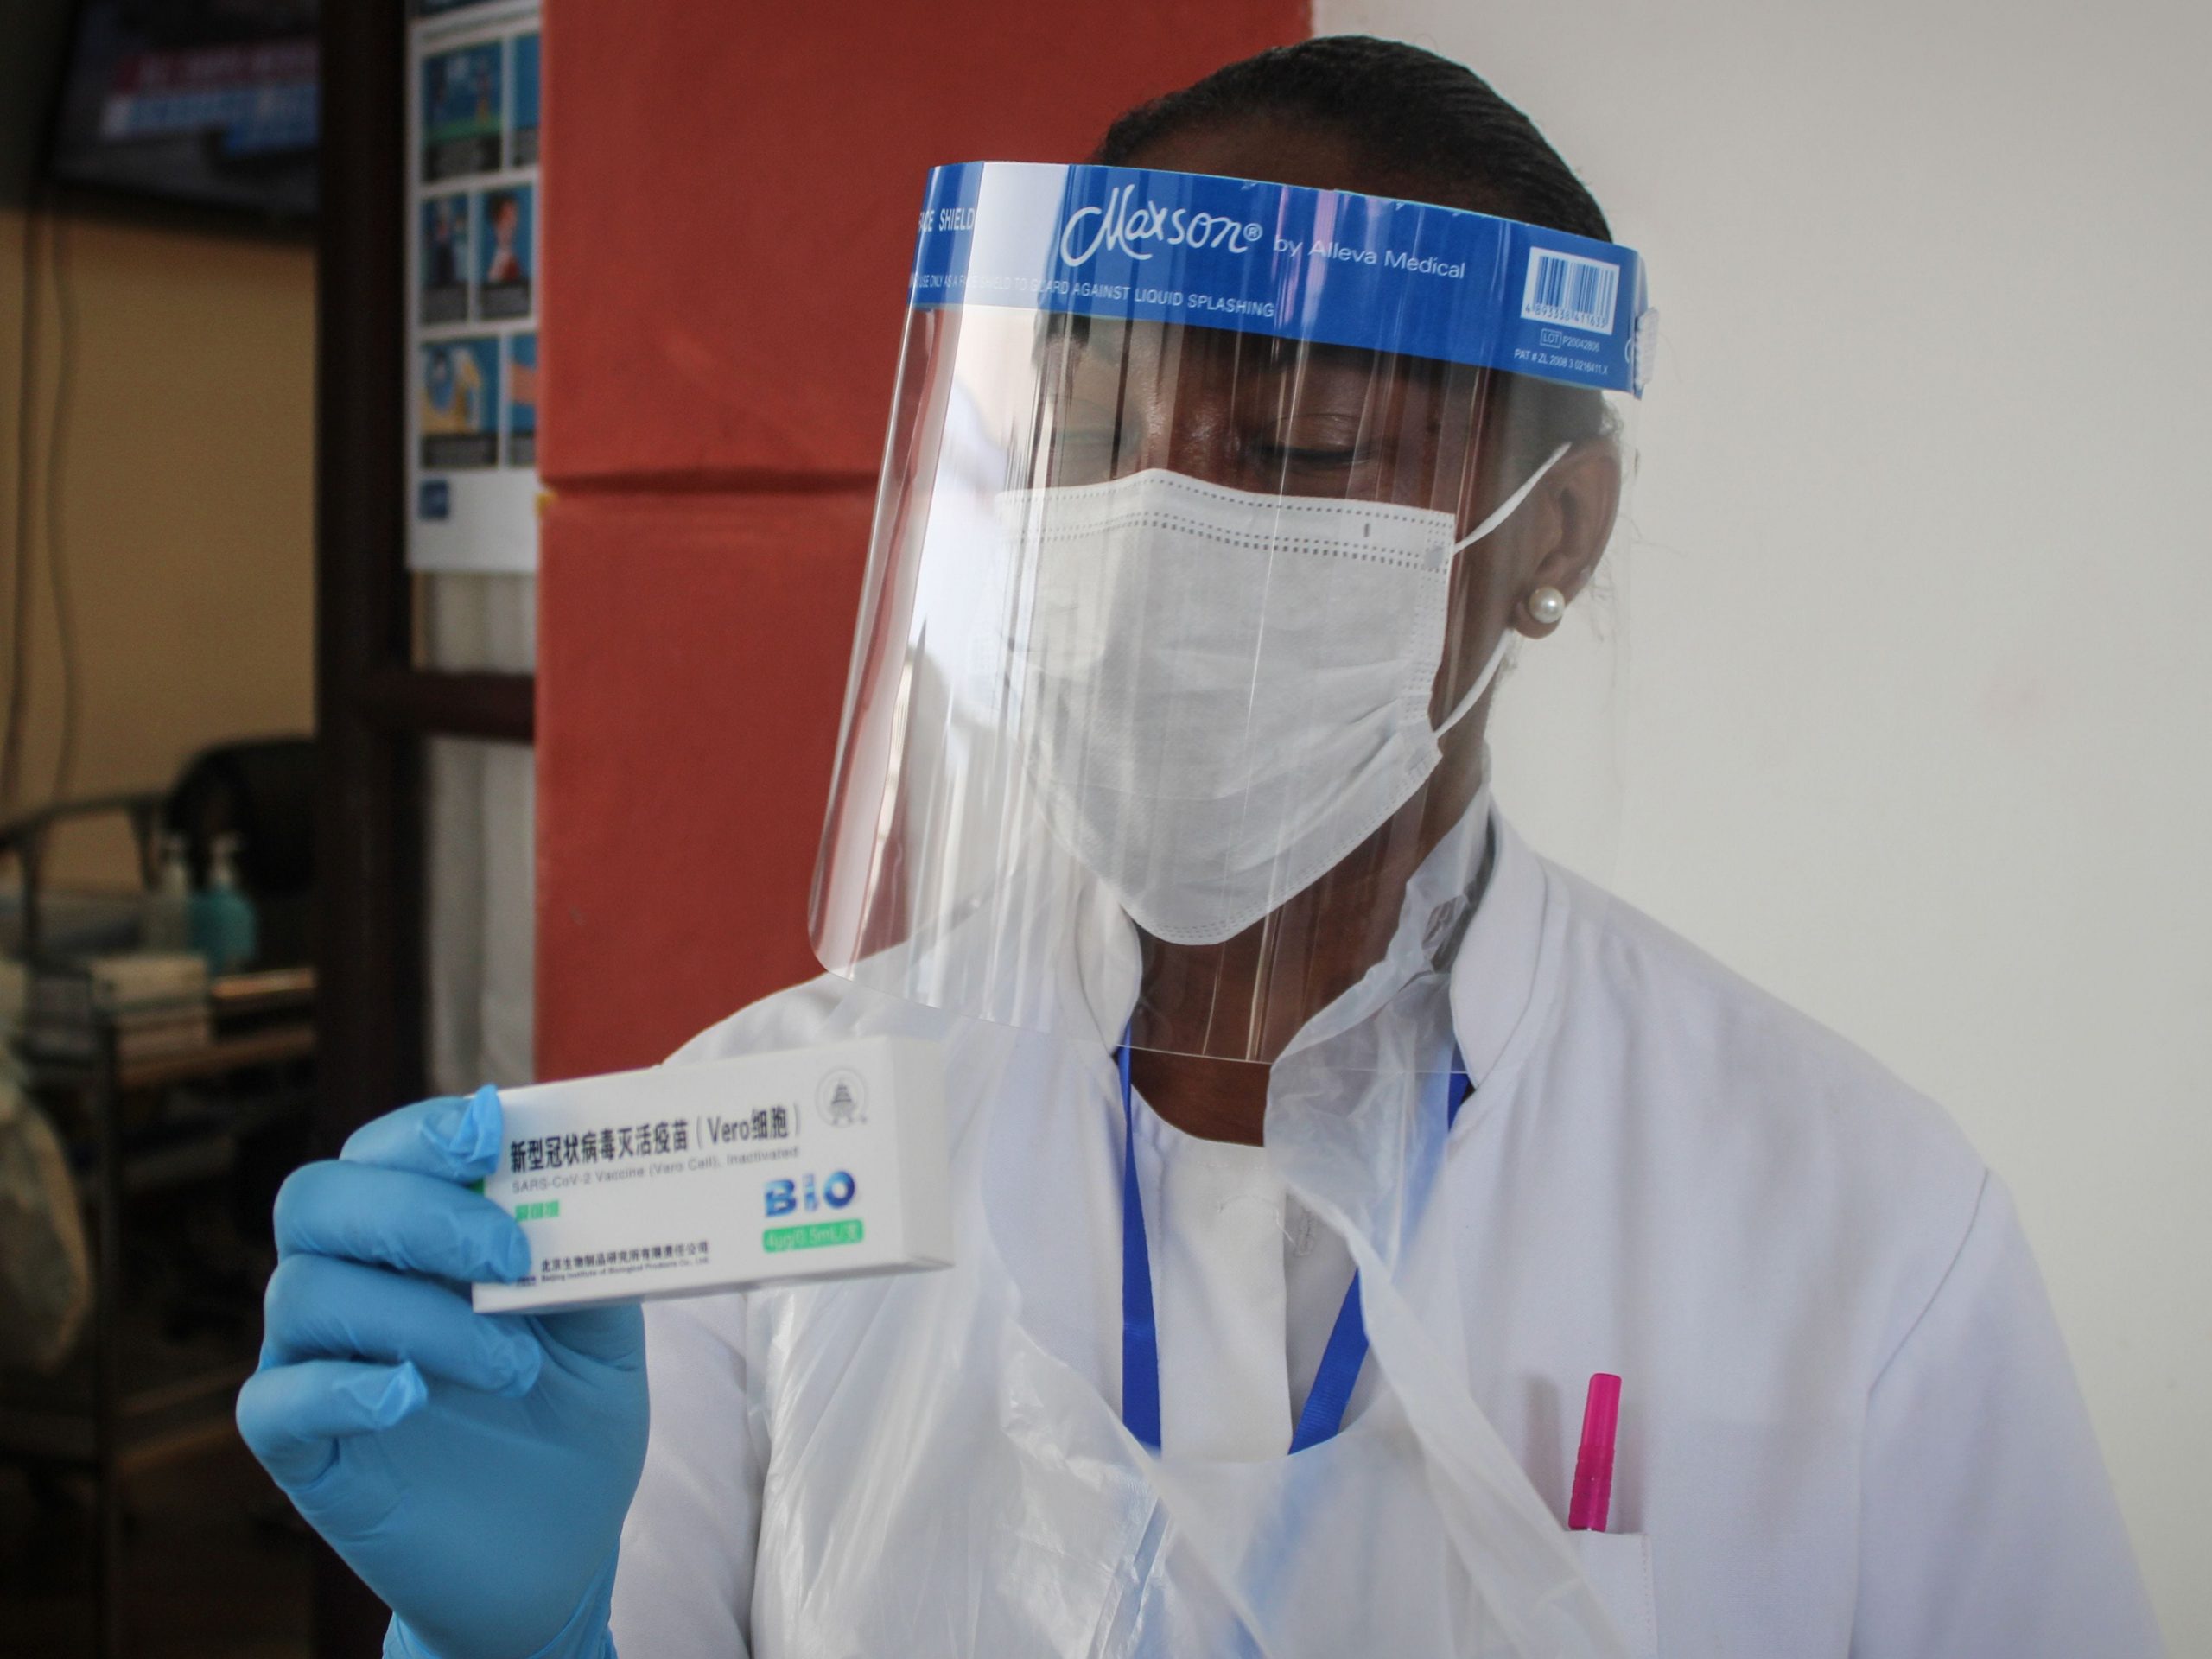 A medical personel holds a box of the first dose of the Chinese Covid-19 vaccine produced by Sinopharm at the Seychelles Hospital in Victoria, on January 10, 2021